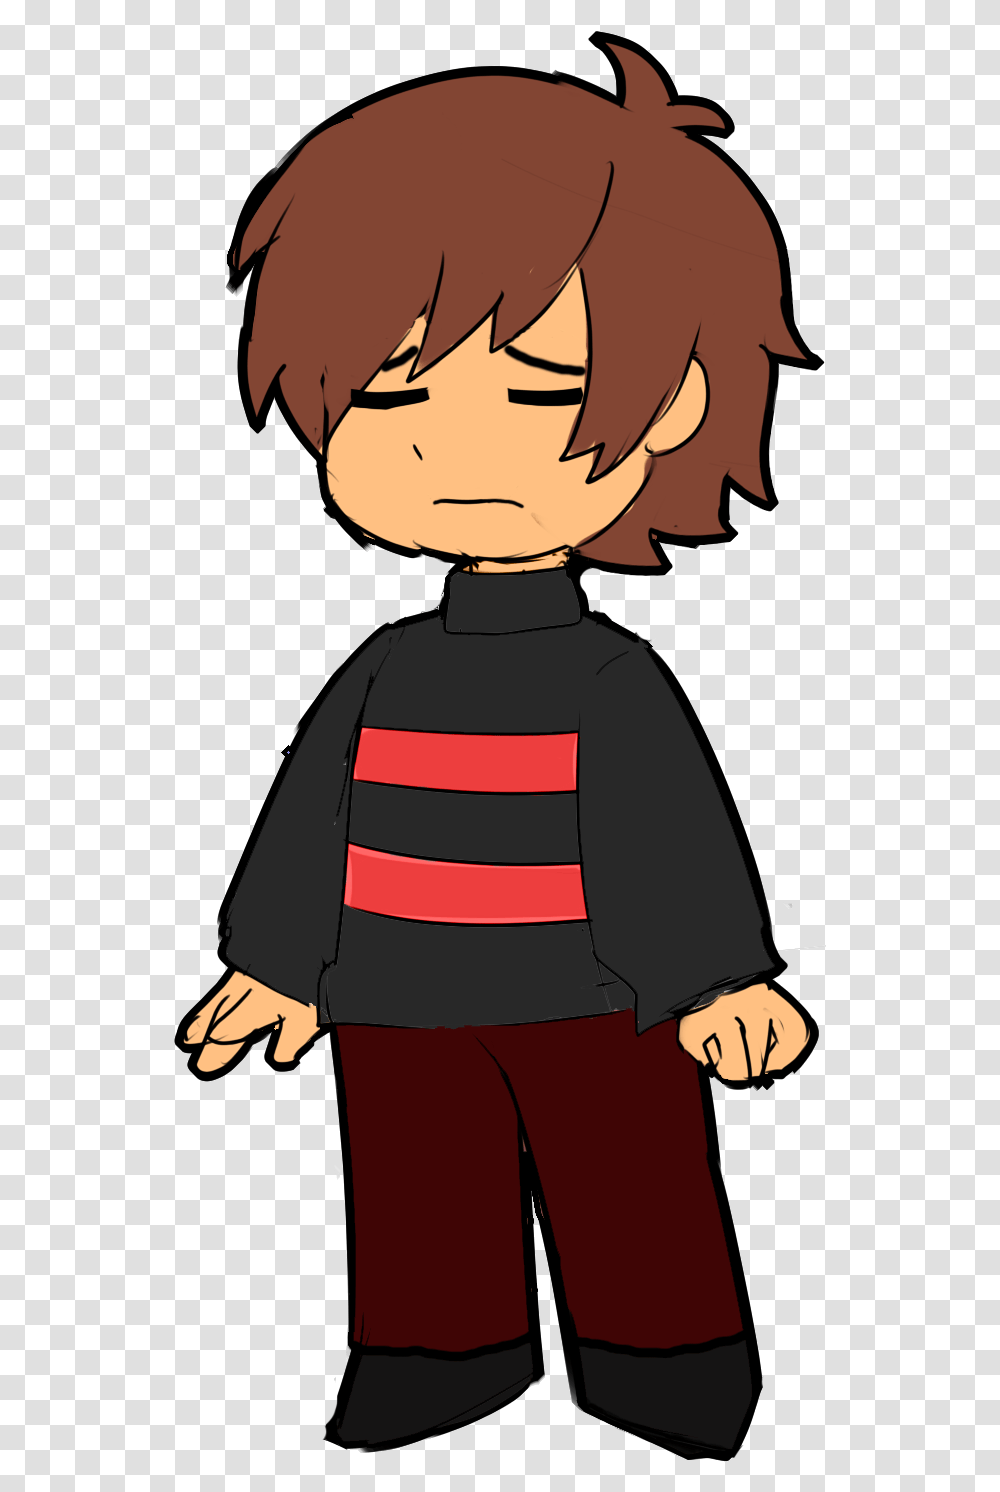 Frisk Underfell Download Underfell Frisk Male, Apparel, Person, Sleeve Transparent Png